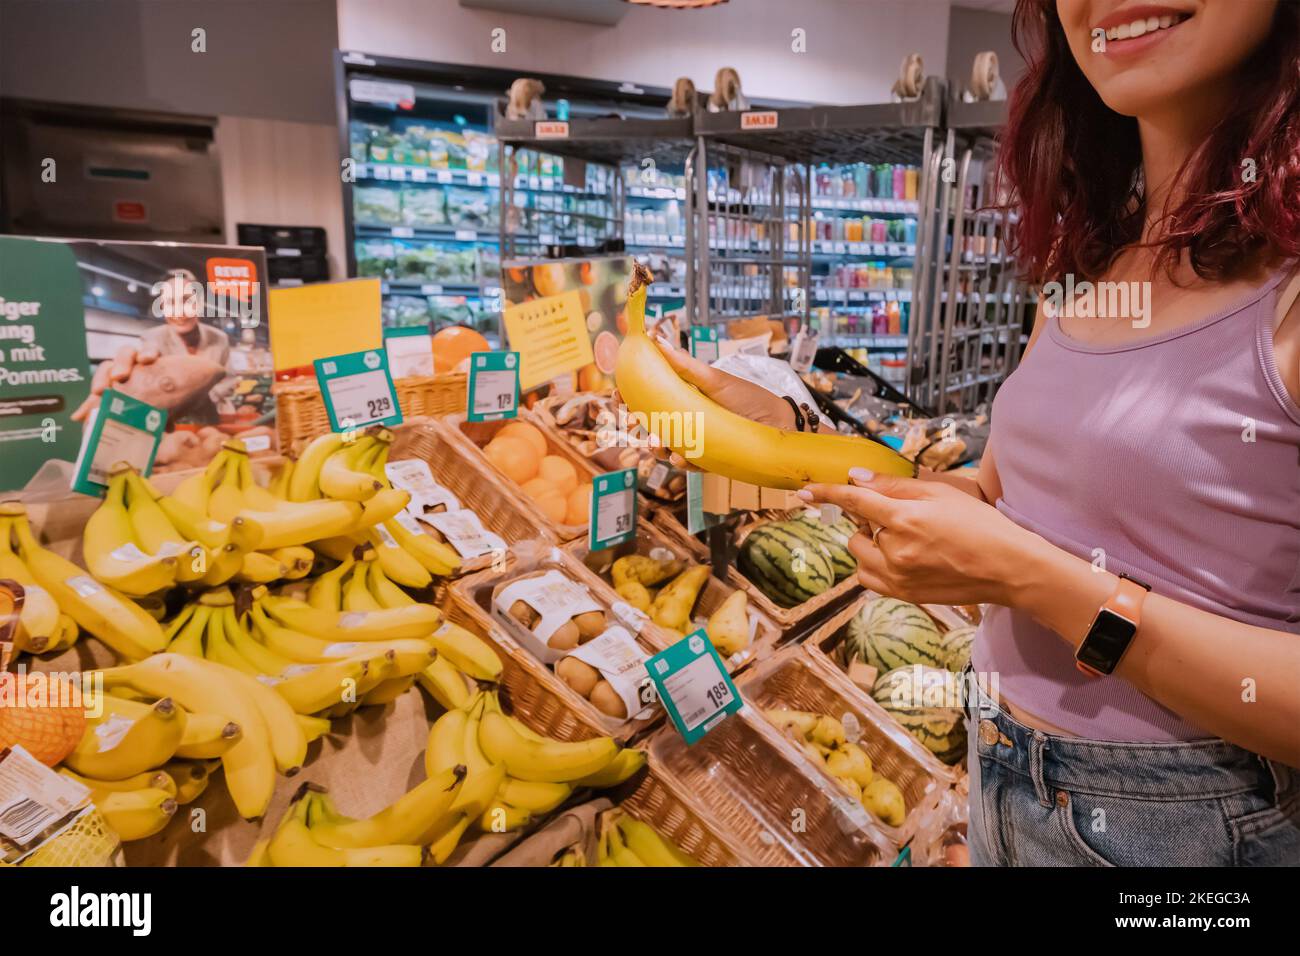 25 July 2022, Munster, Germany: Client woman choosing and buying bananas at grocery store or supermarket Stock Photo